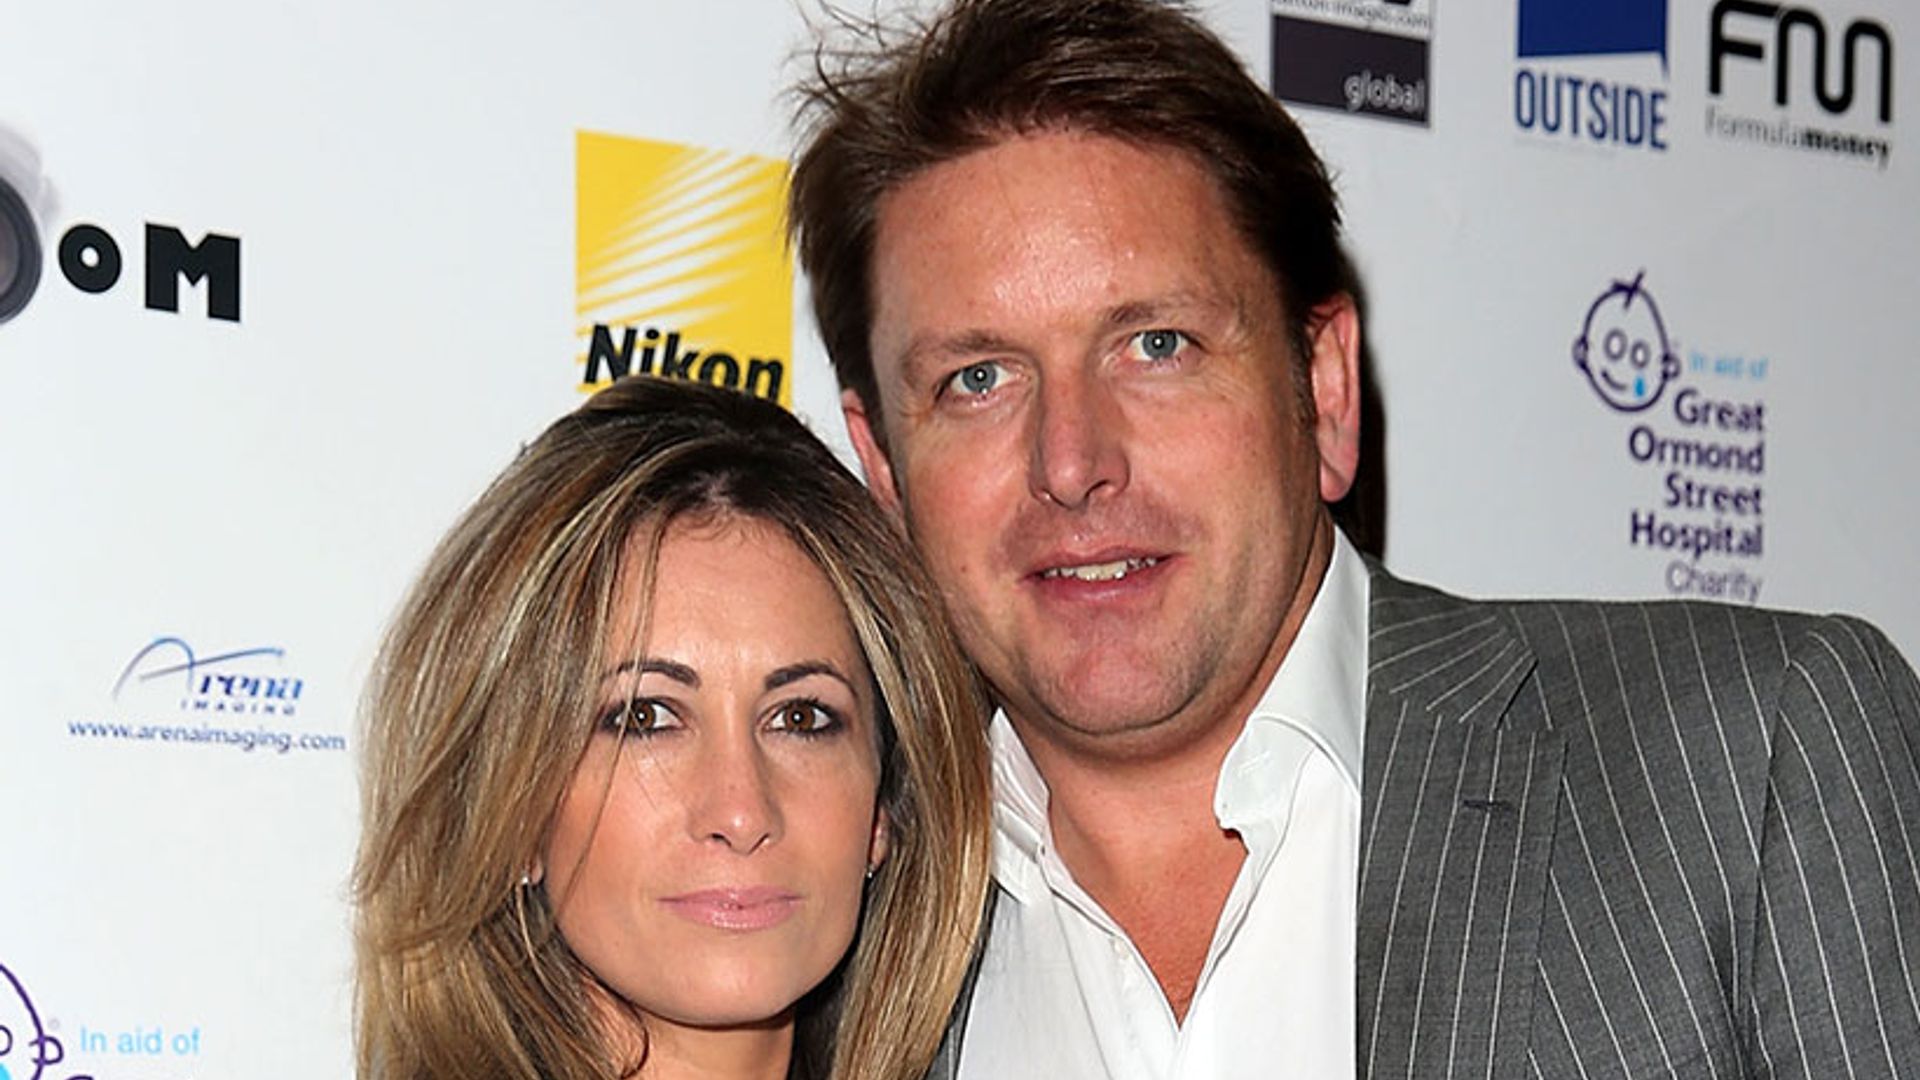 James Martin reveals personal life sacrifices as celebrity chef: 'It made relationships tough'